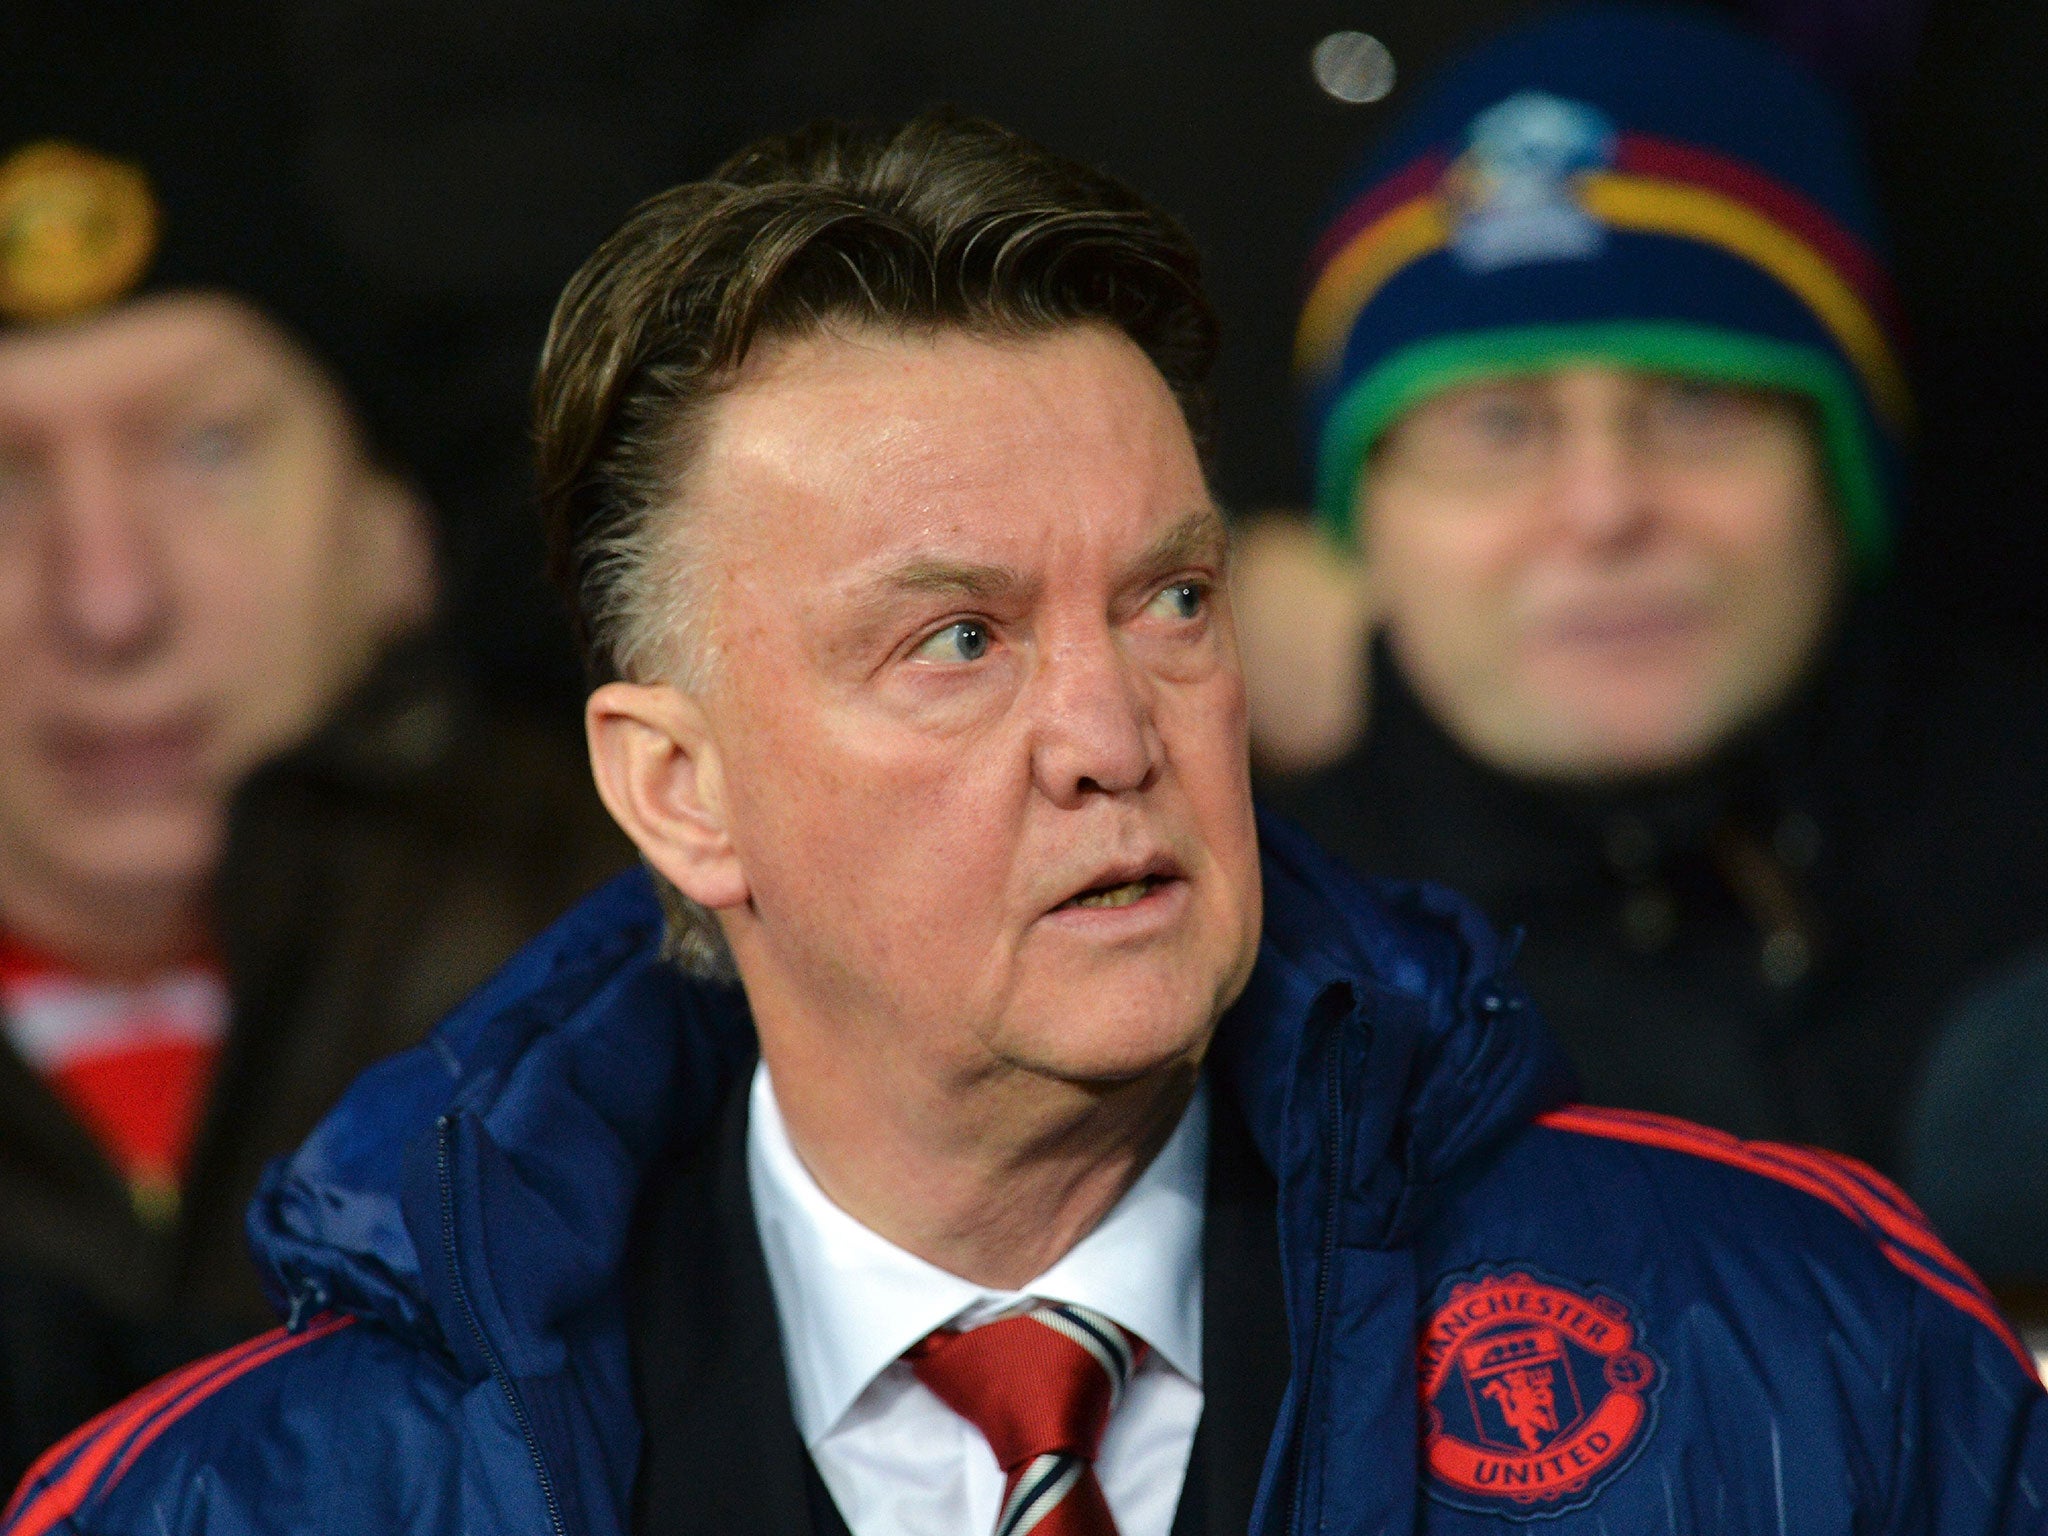 Louis van Gaal at Old Trafford for Manchester United's win over Stoke